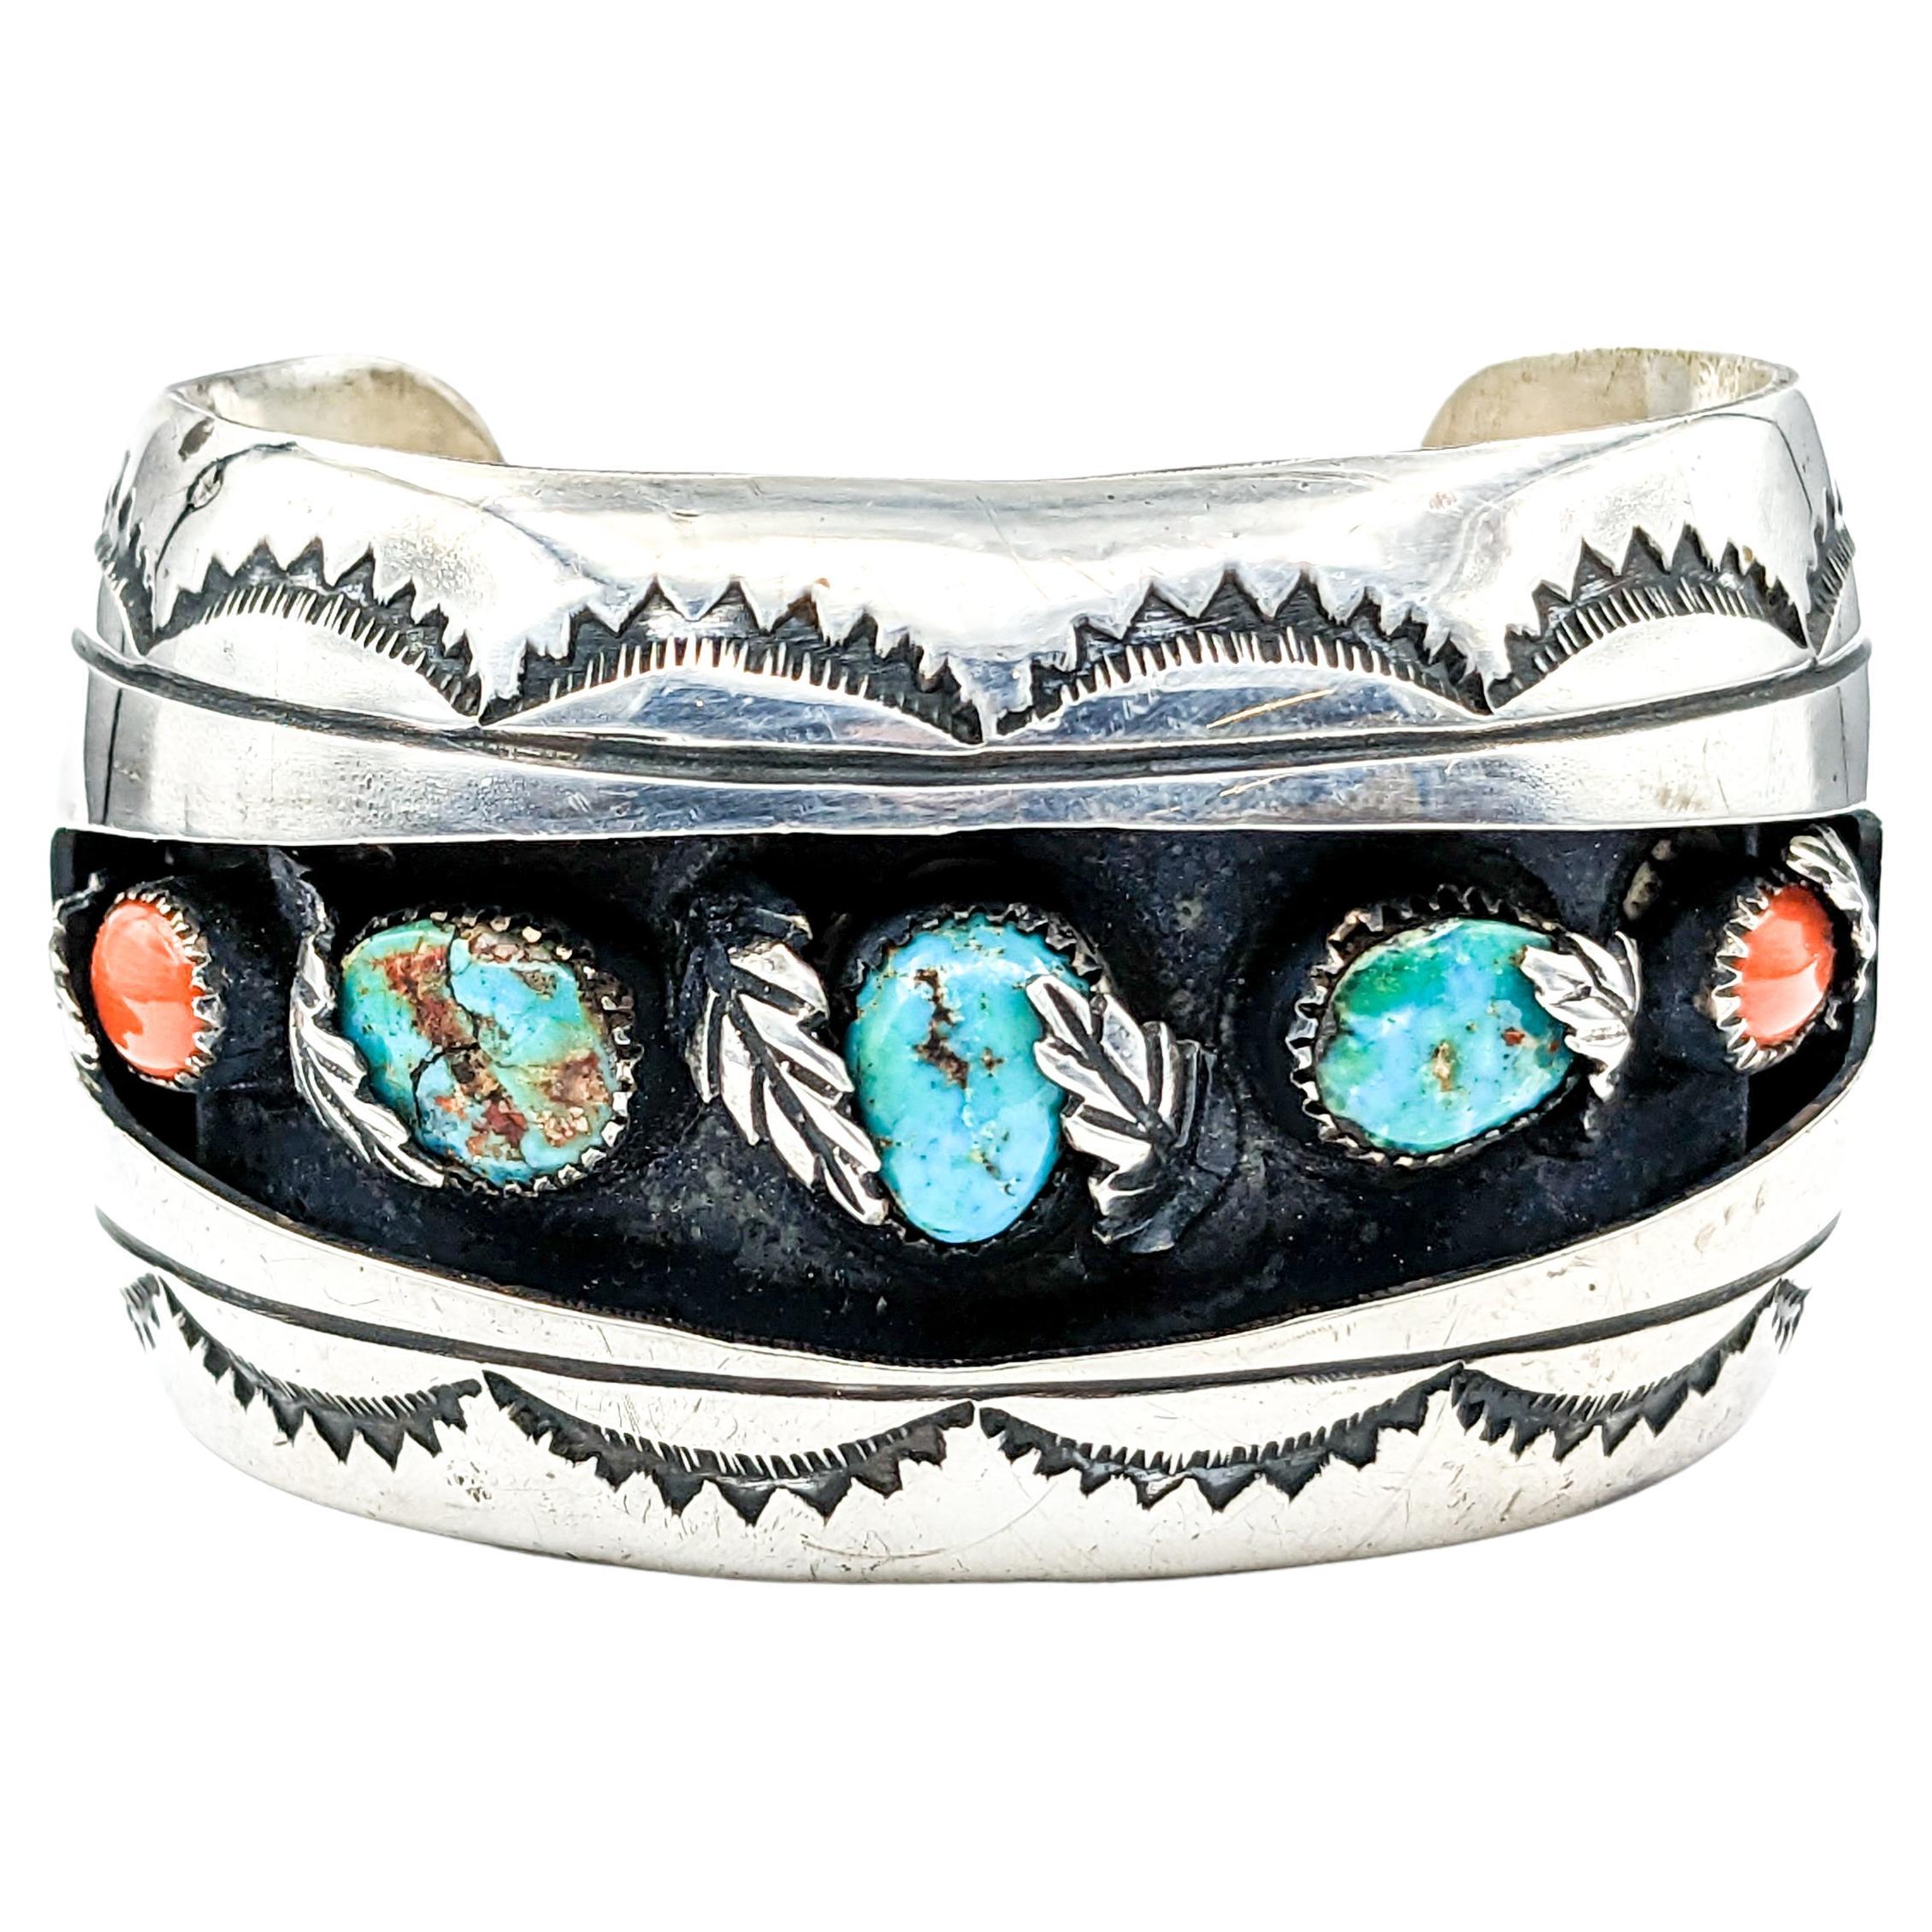 Statement Navajo Turquoise & Coral Cuff Bracelet in Sterling Silver 